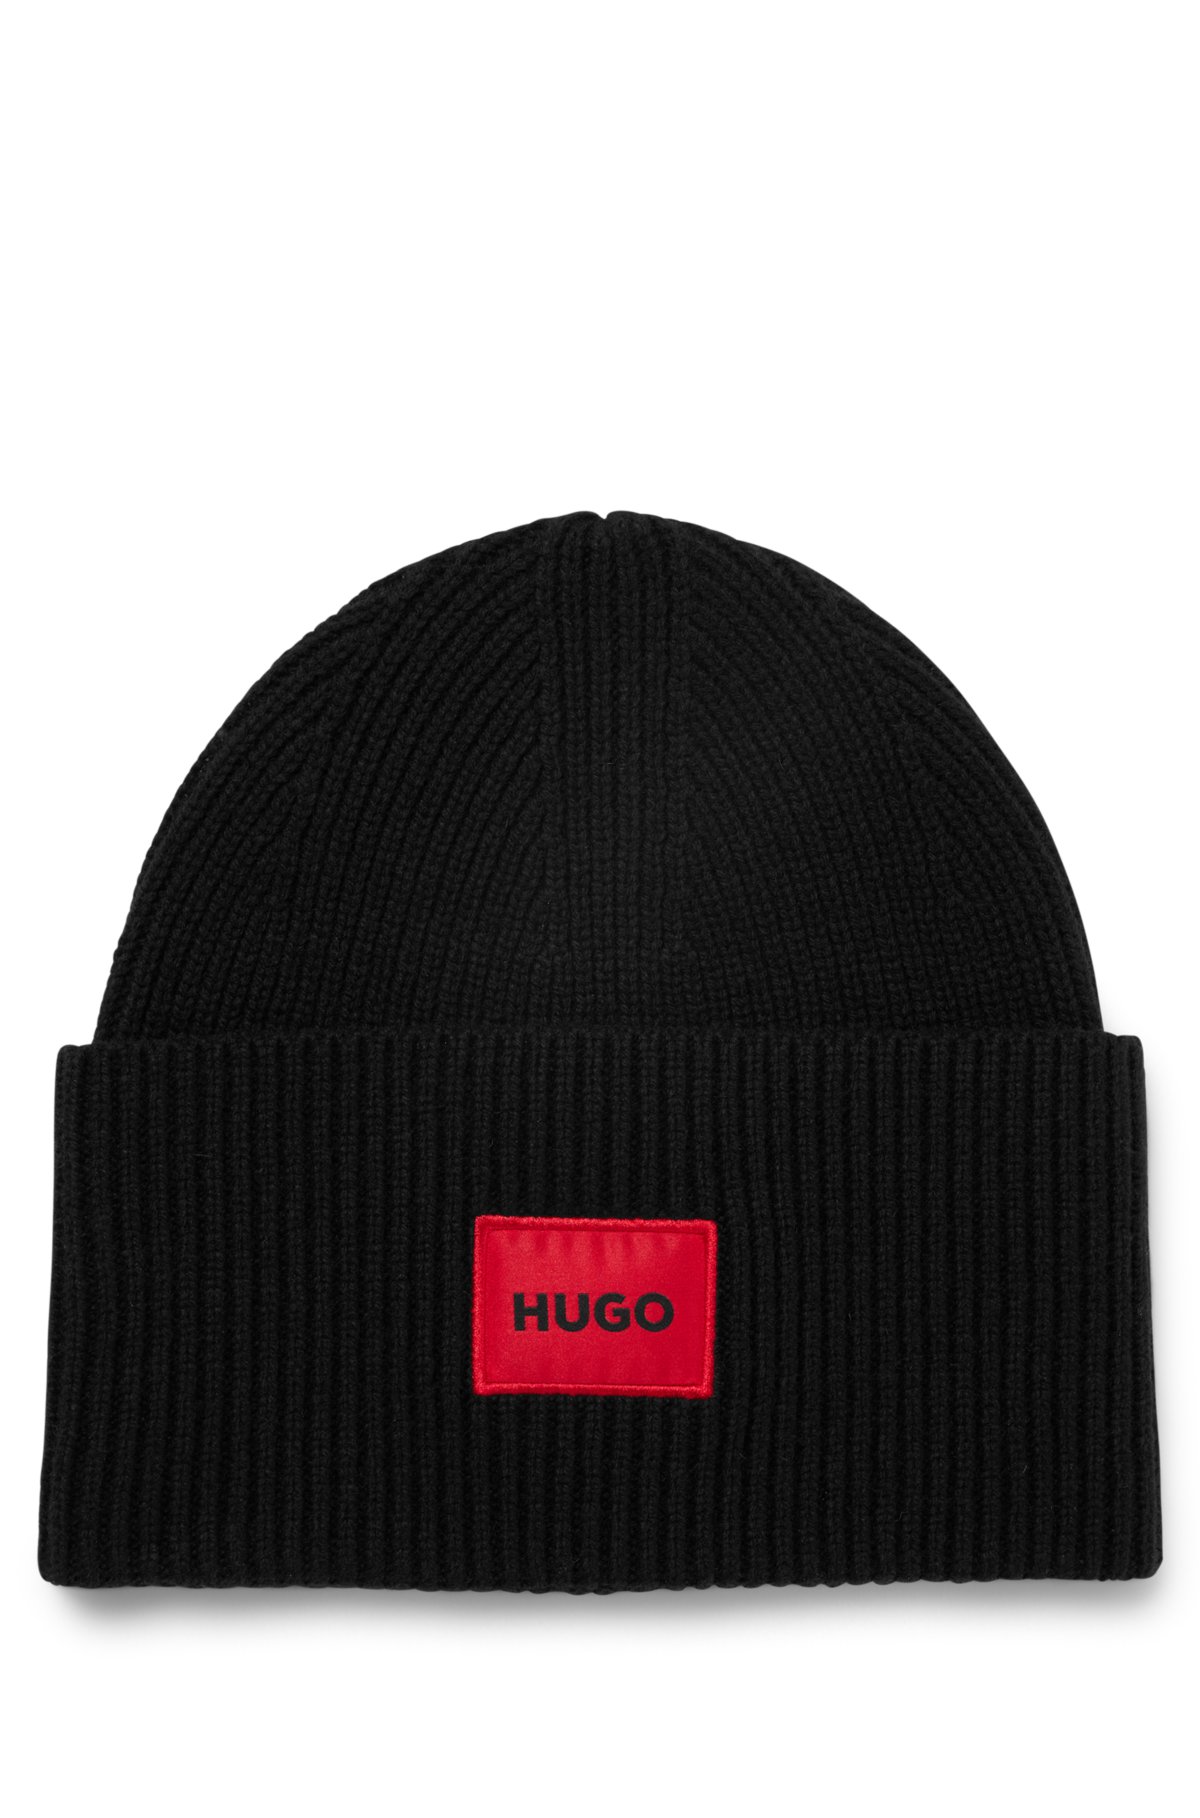 HUGO - Wool-blend beanie hat label logo red with